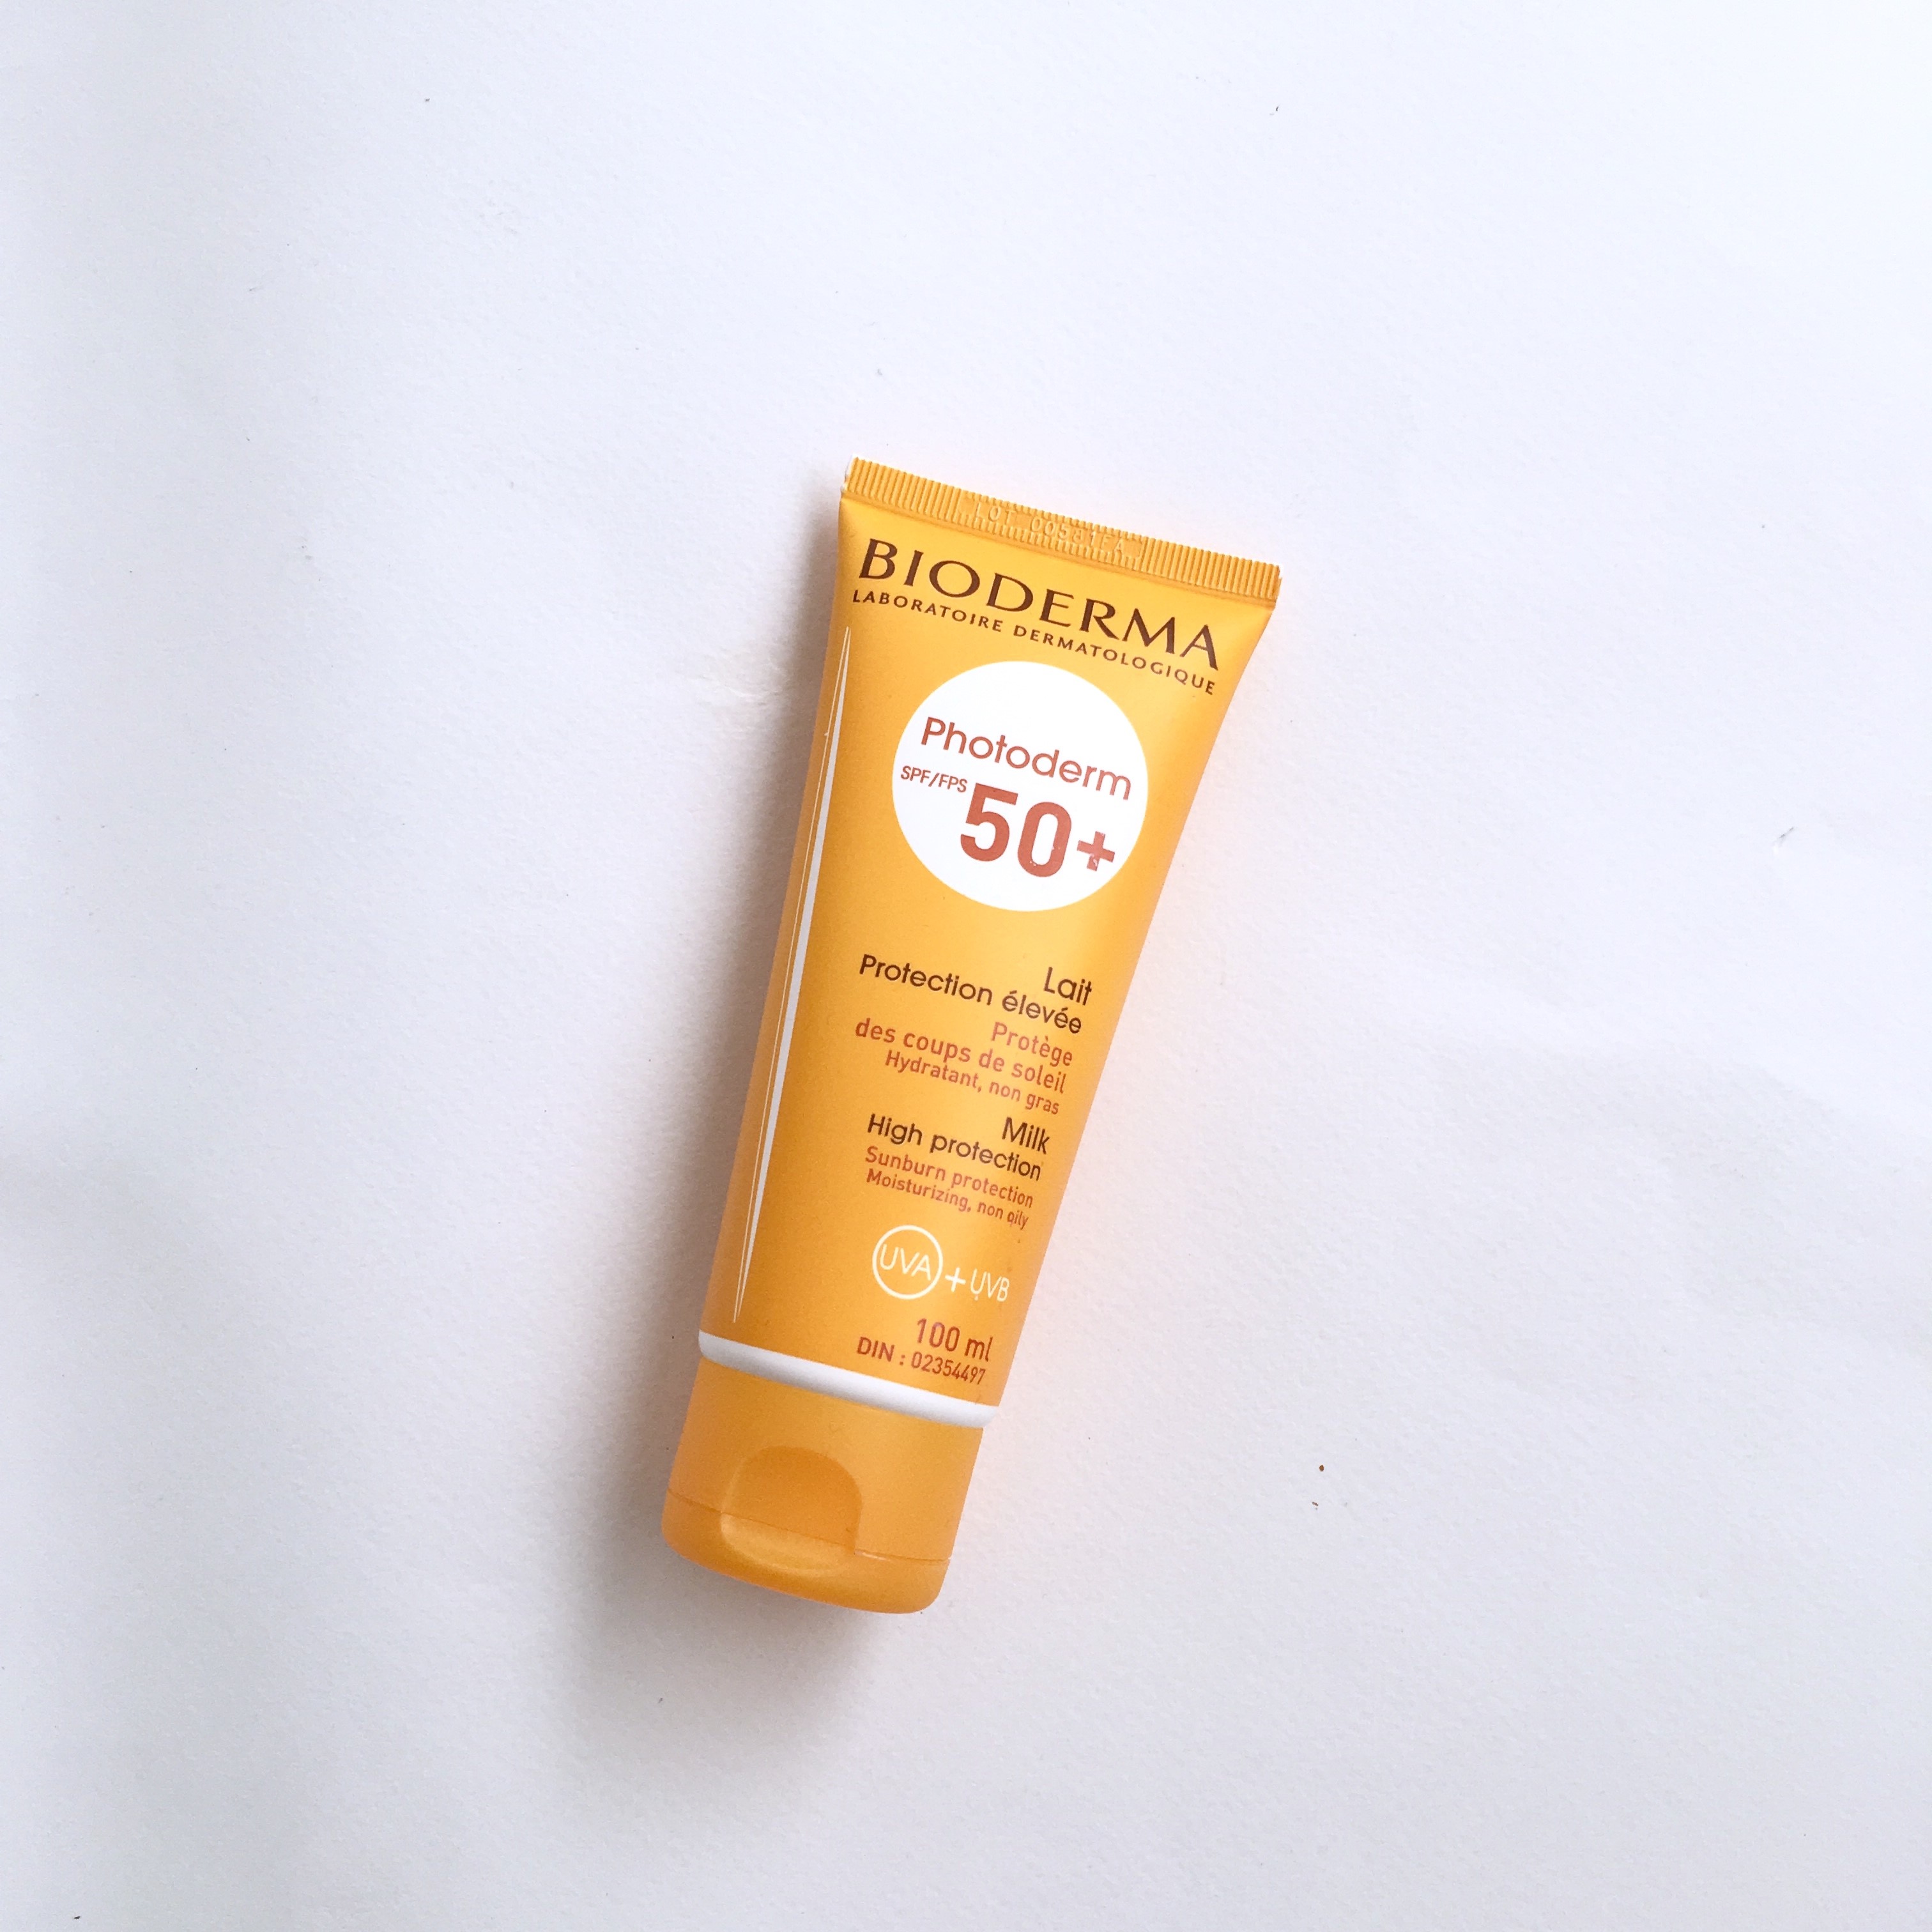 Fountain of Youth: Bioderma Photoderm Milk SPF 50+ PPD 42 Review